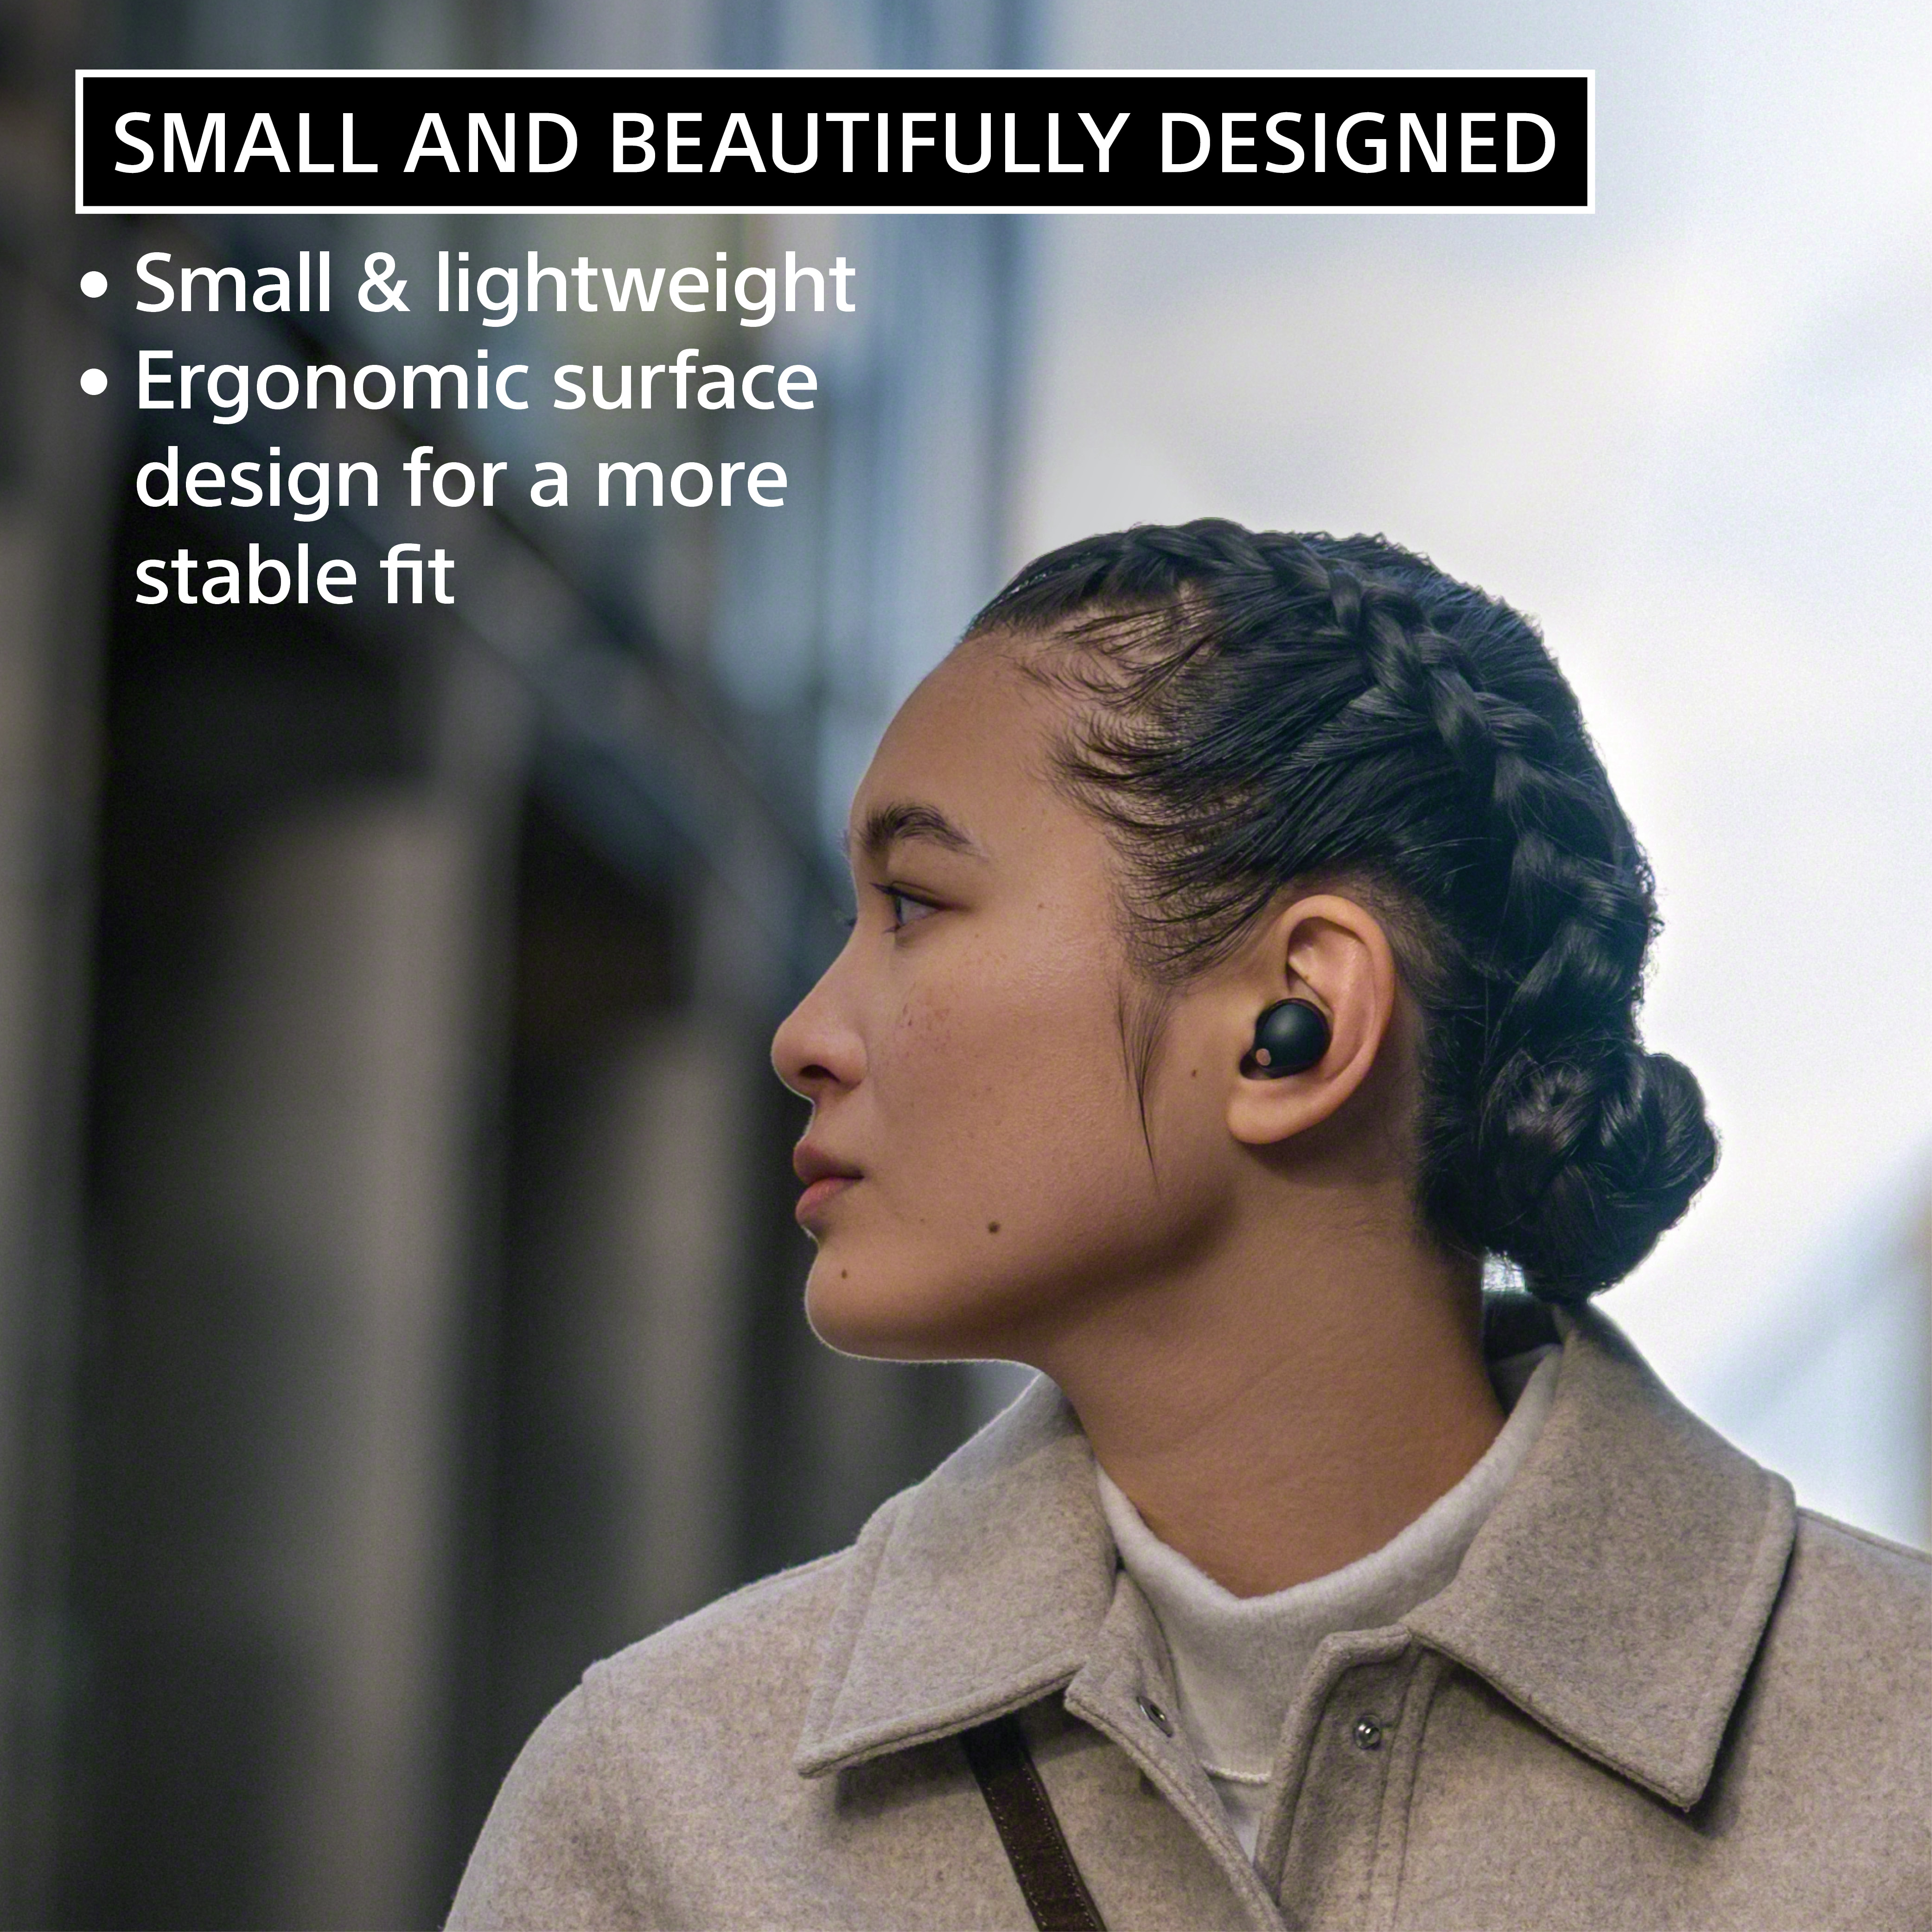 Sony WF-1000XM5 The Best Truly Wireless Bluetooth Noise Canceling Earbuds Headphones, Black - image 5 of 14